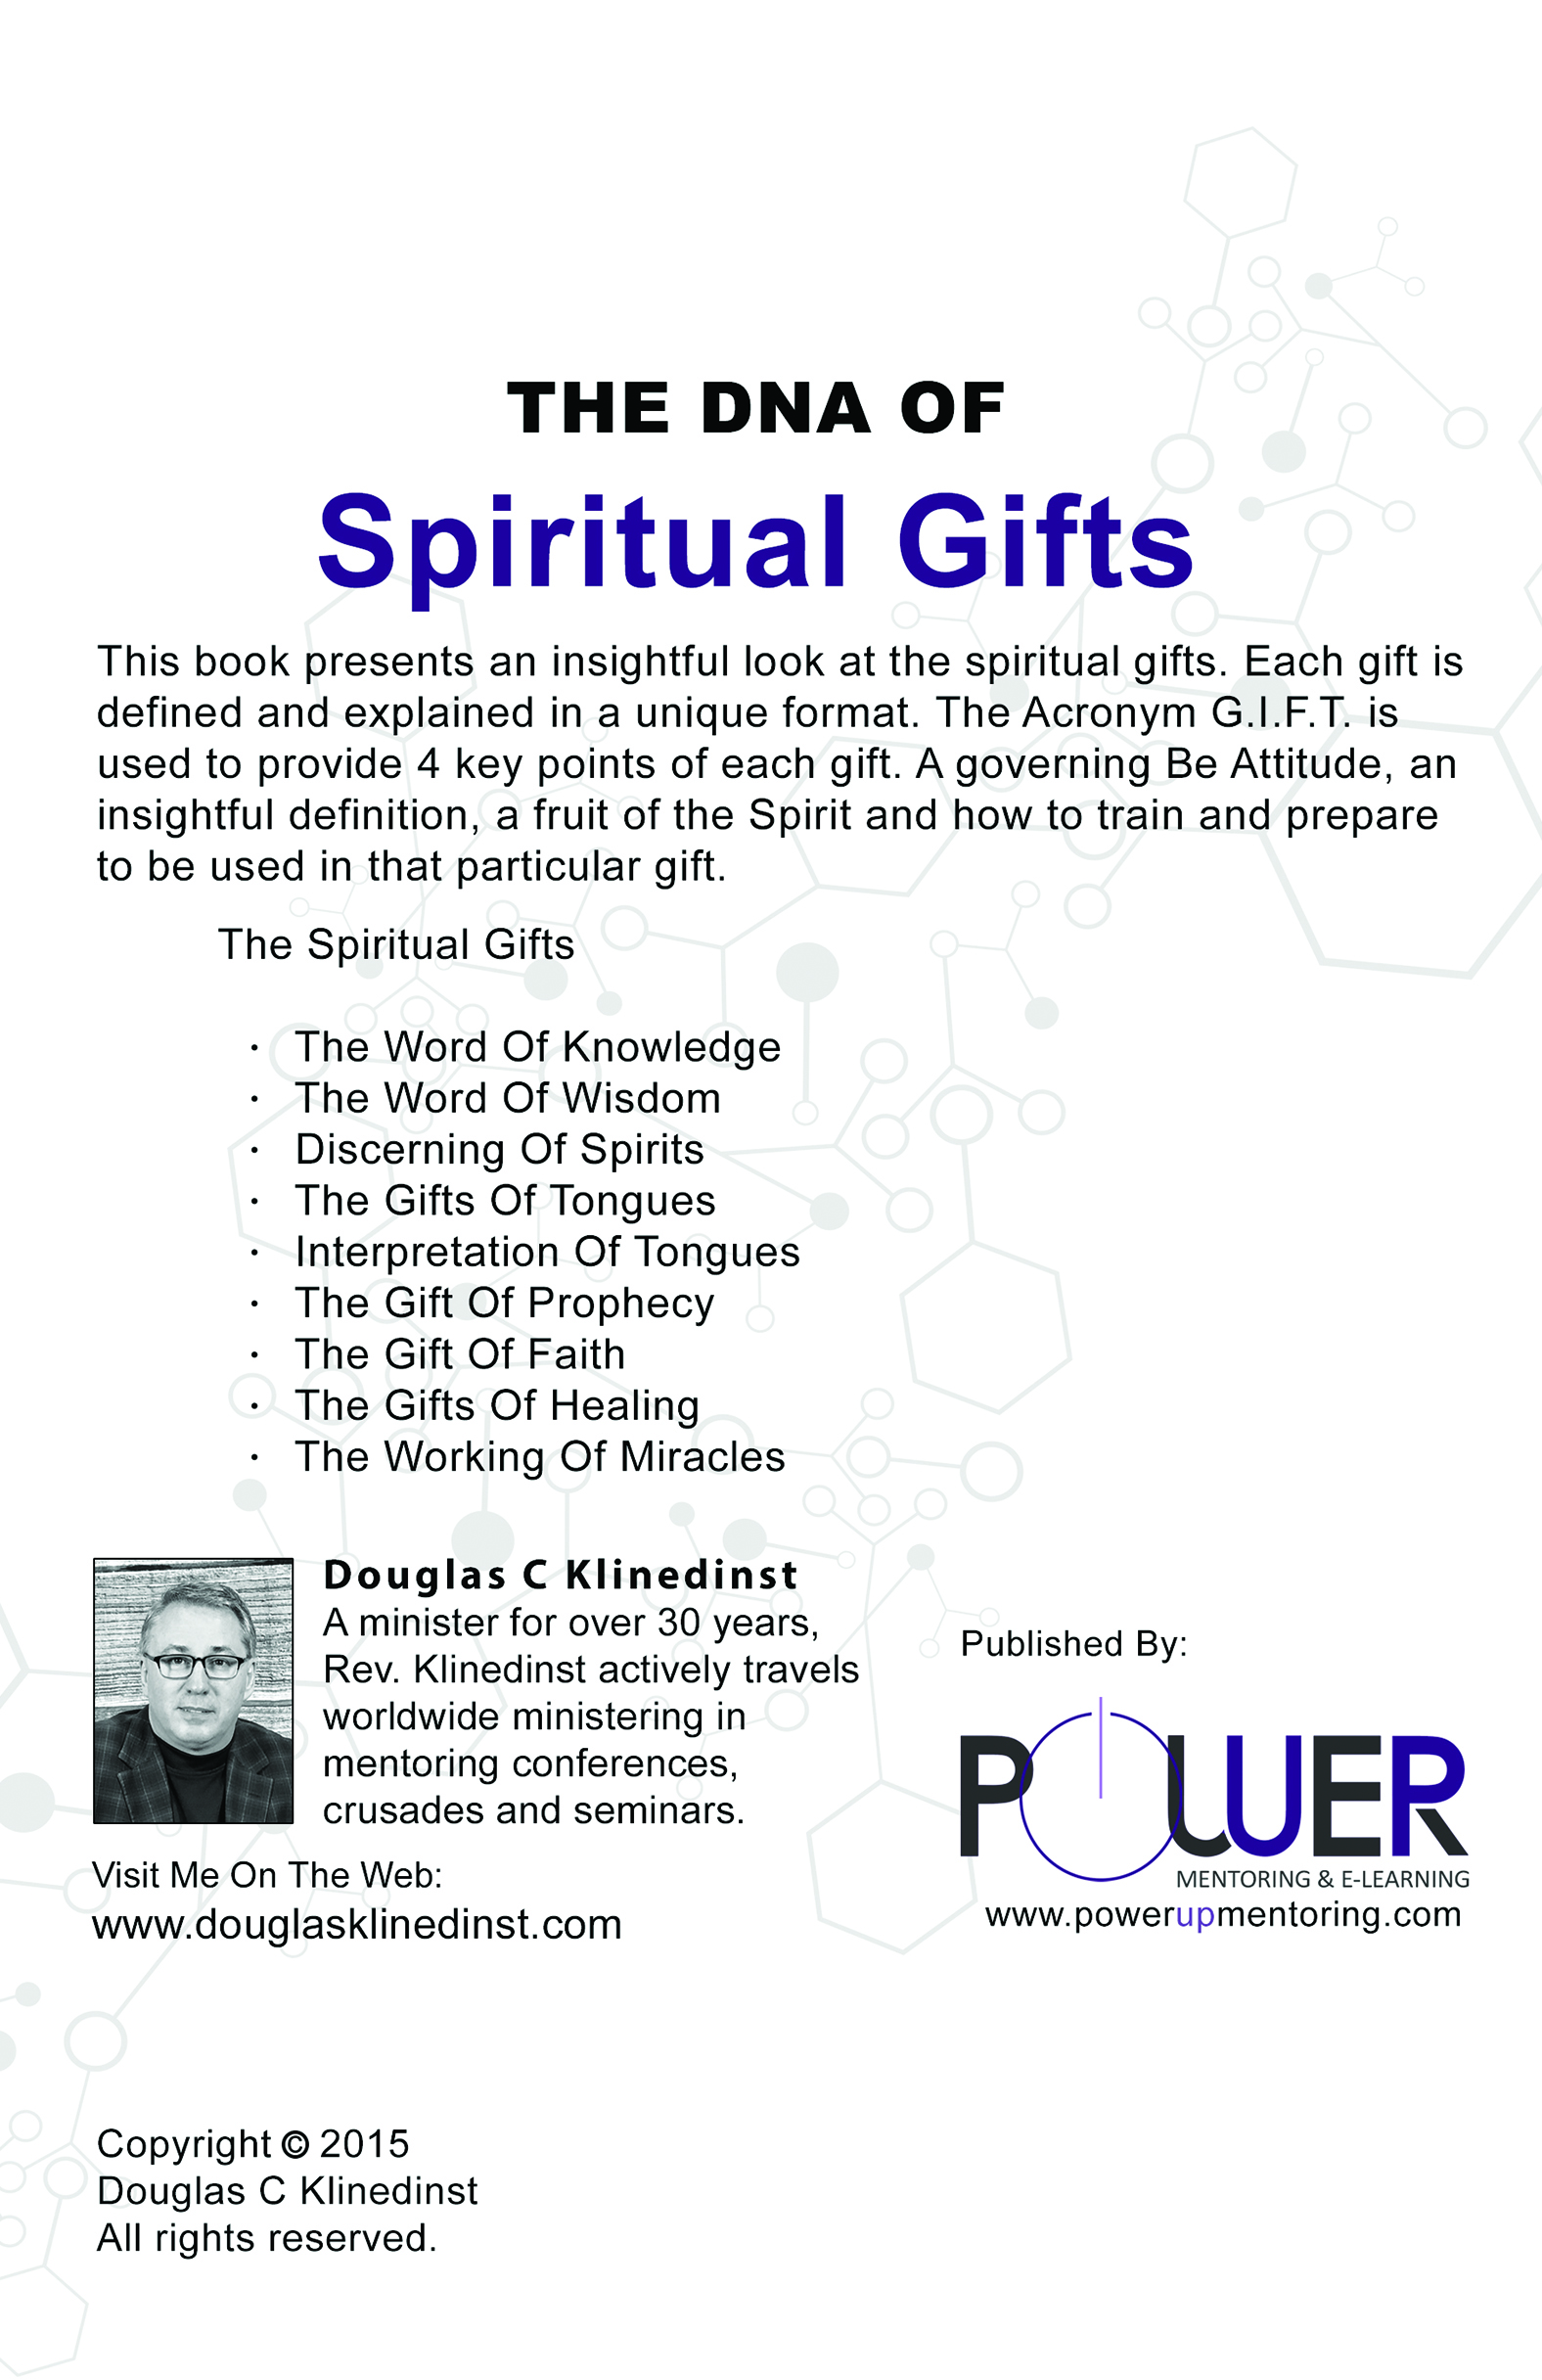 The DNA of Spiritual Gifts